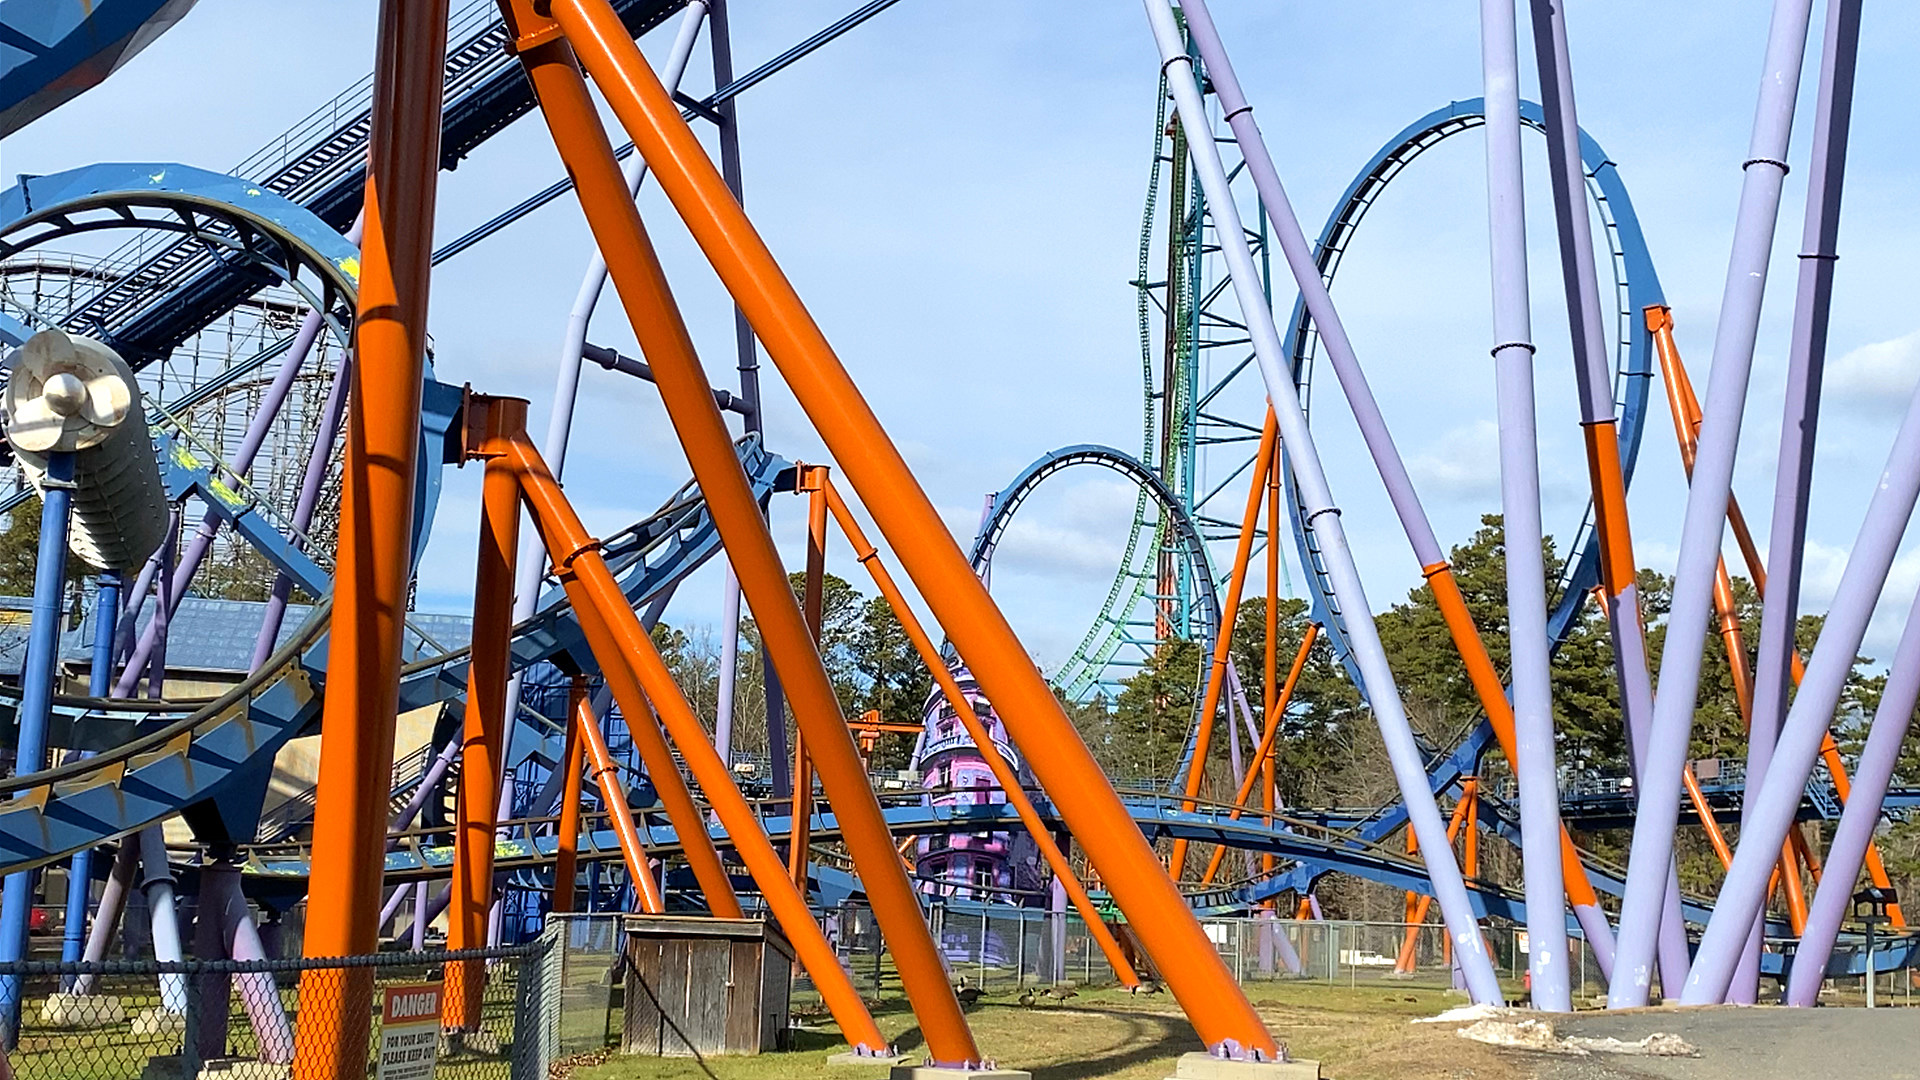 Wild 'Jersey Devil' Roller Coaster At Six Flags Opens Sunday